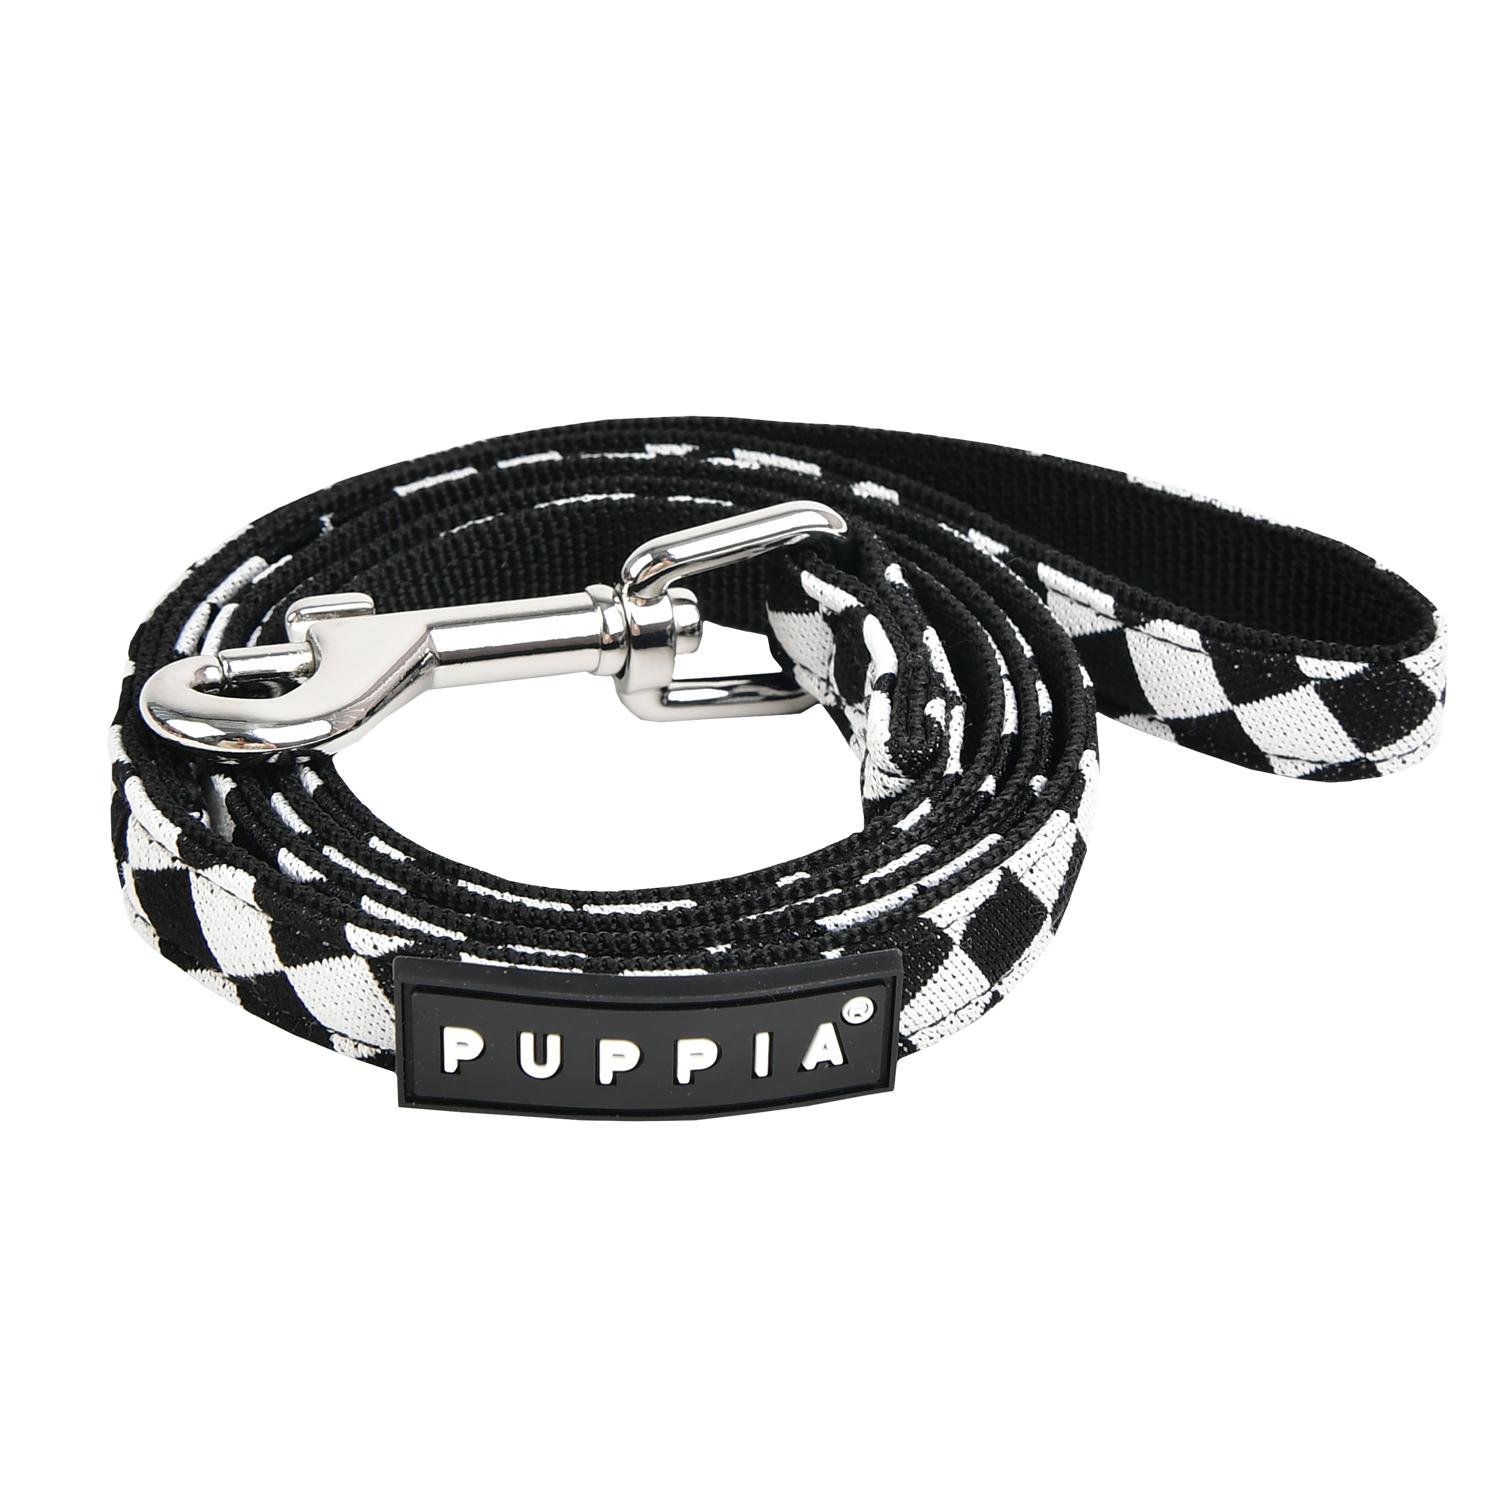 Racer Dog Leash by Puppia - Black